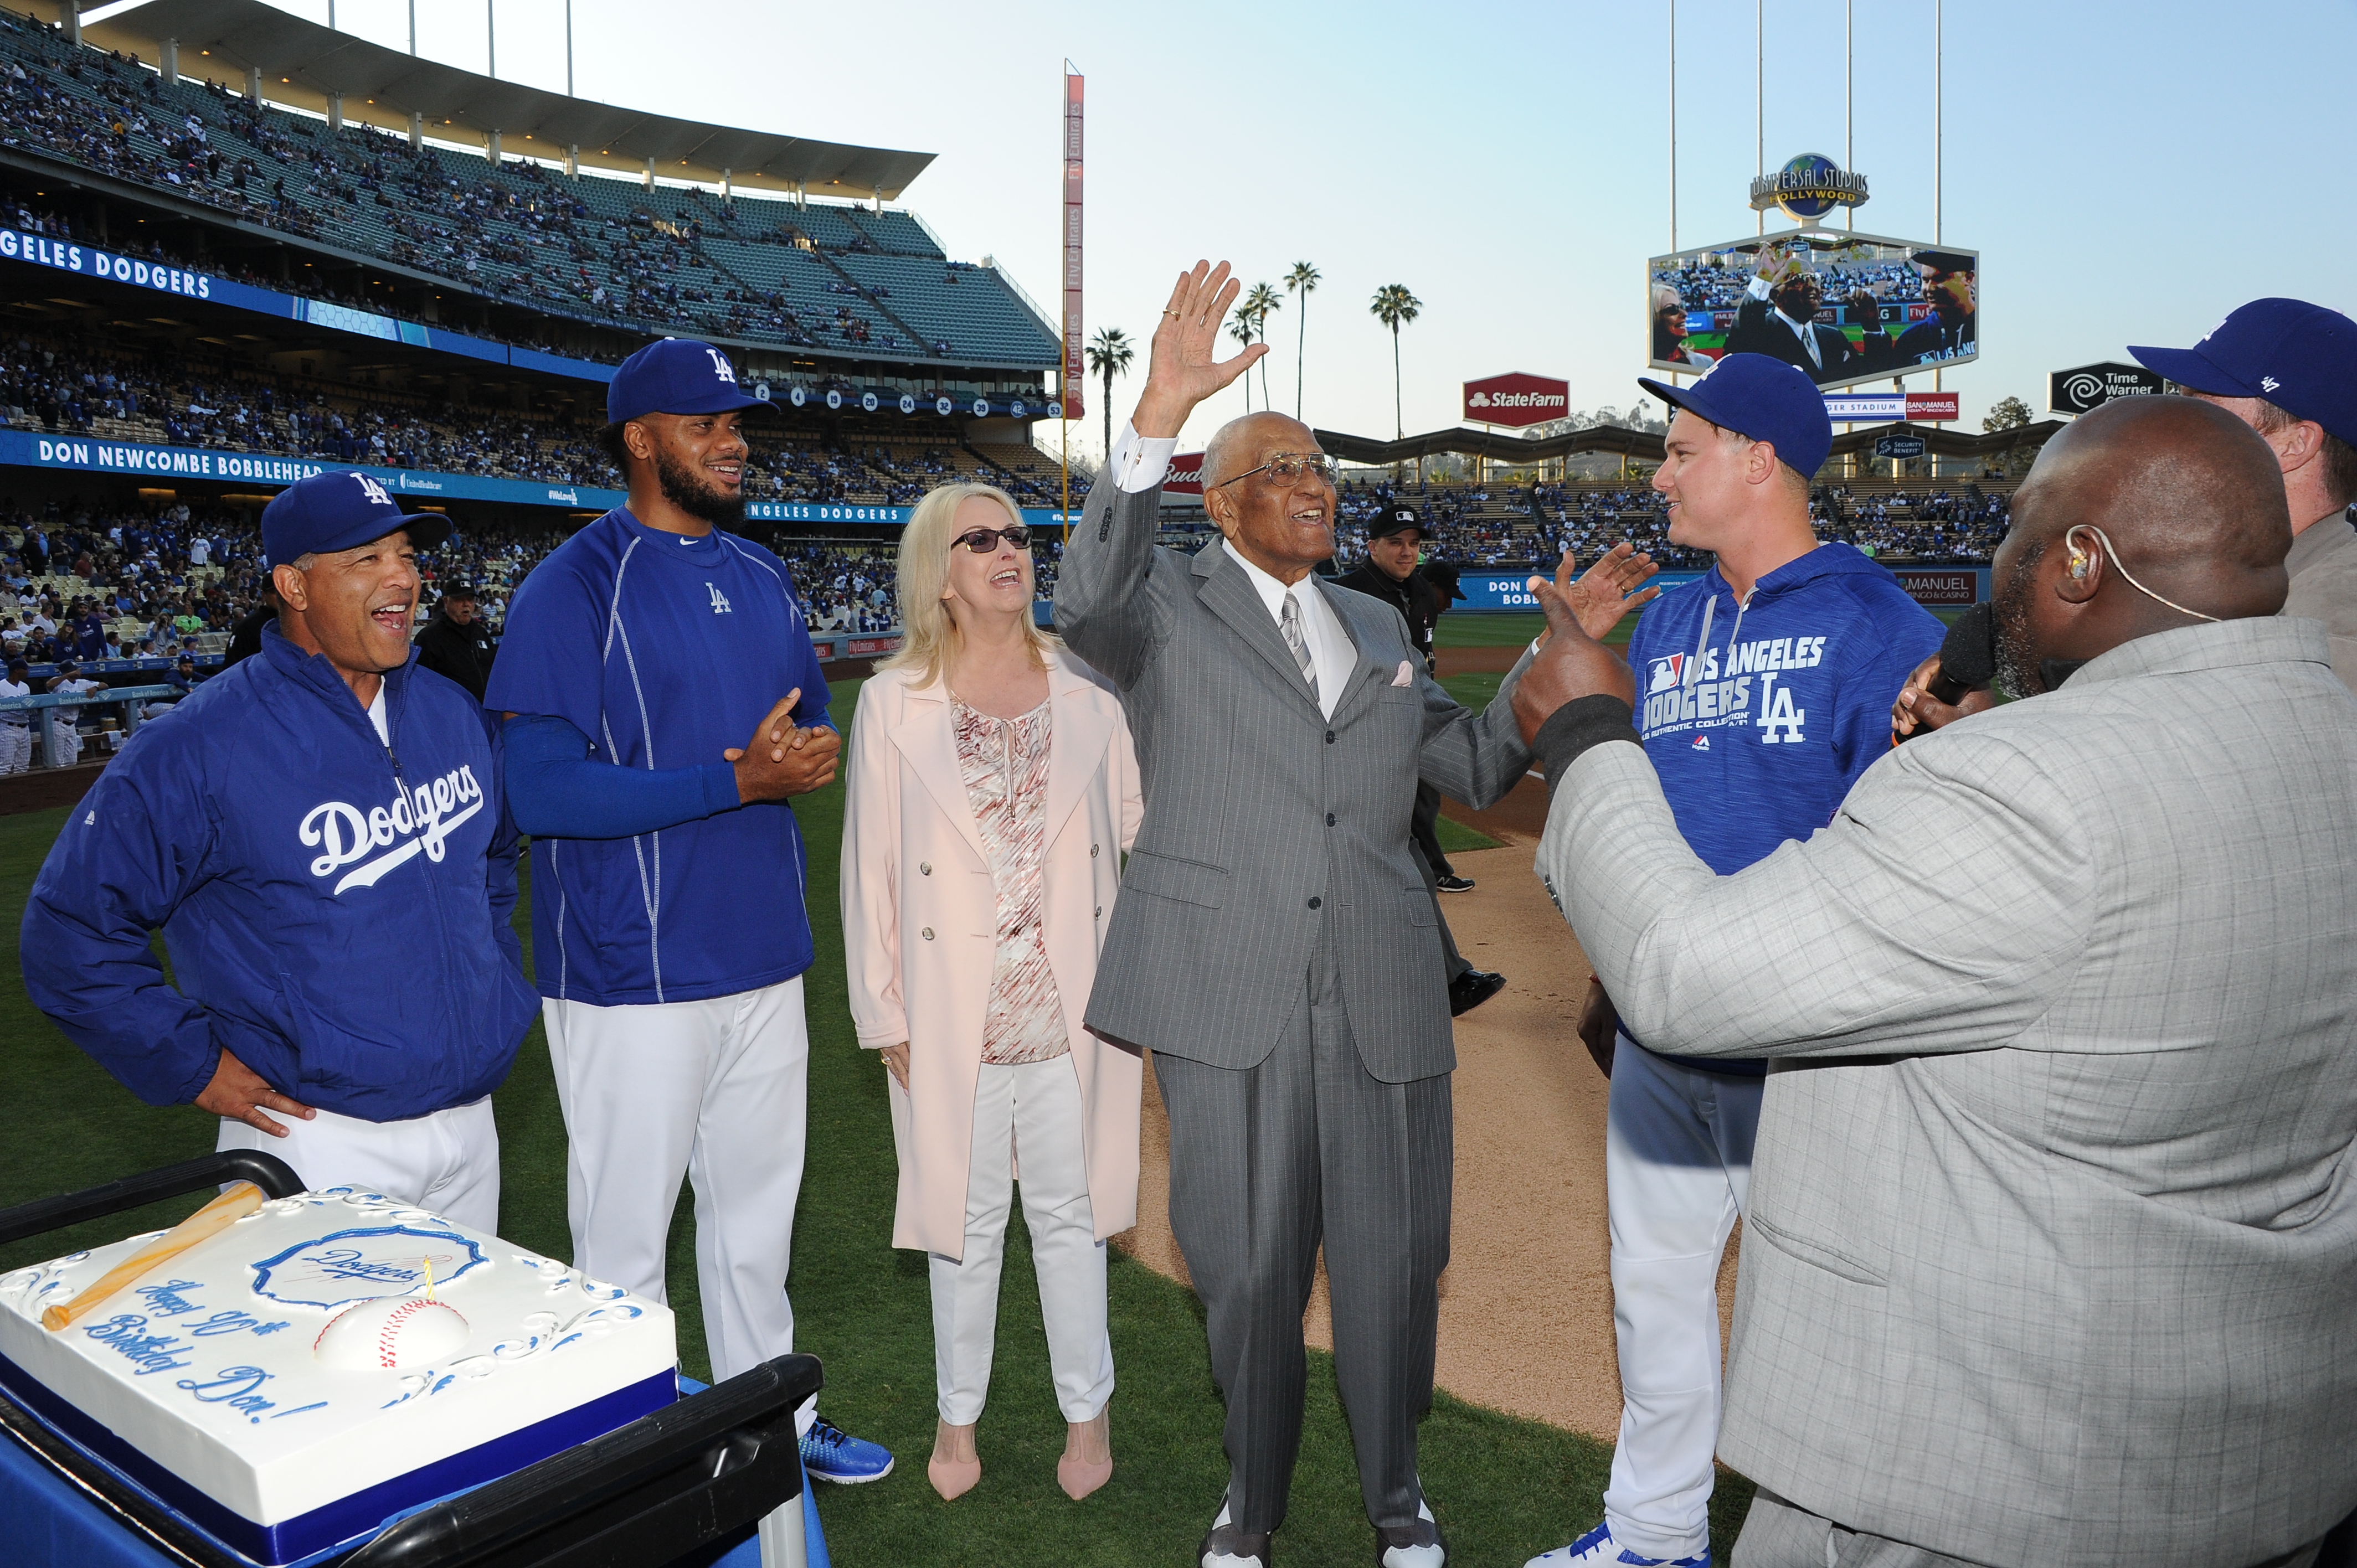 dodgers, Tops, New 223 Dodger Stadium Promotional Vin Scully Jersey